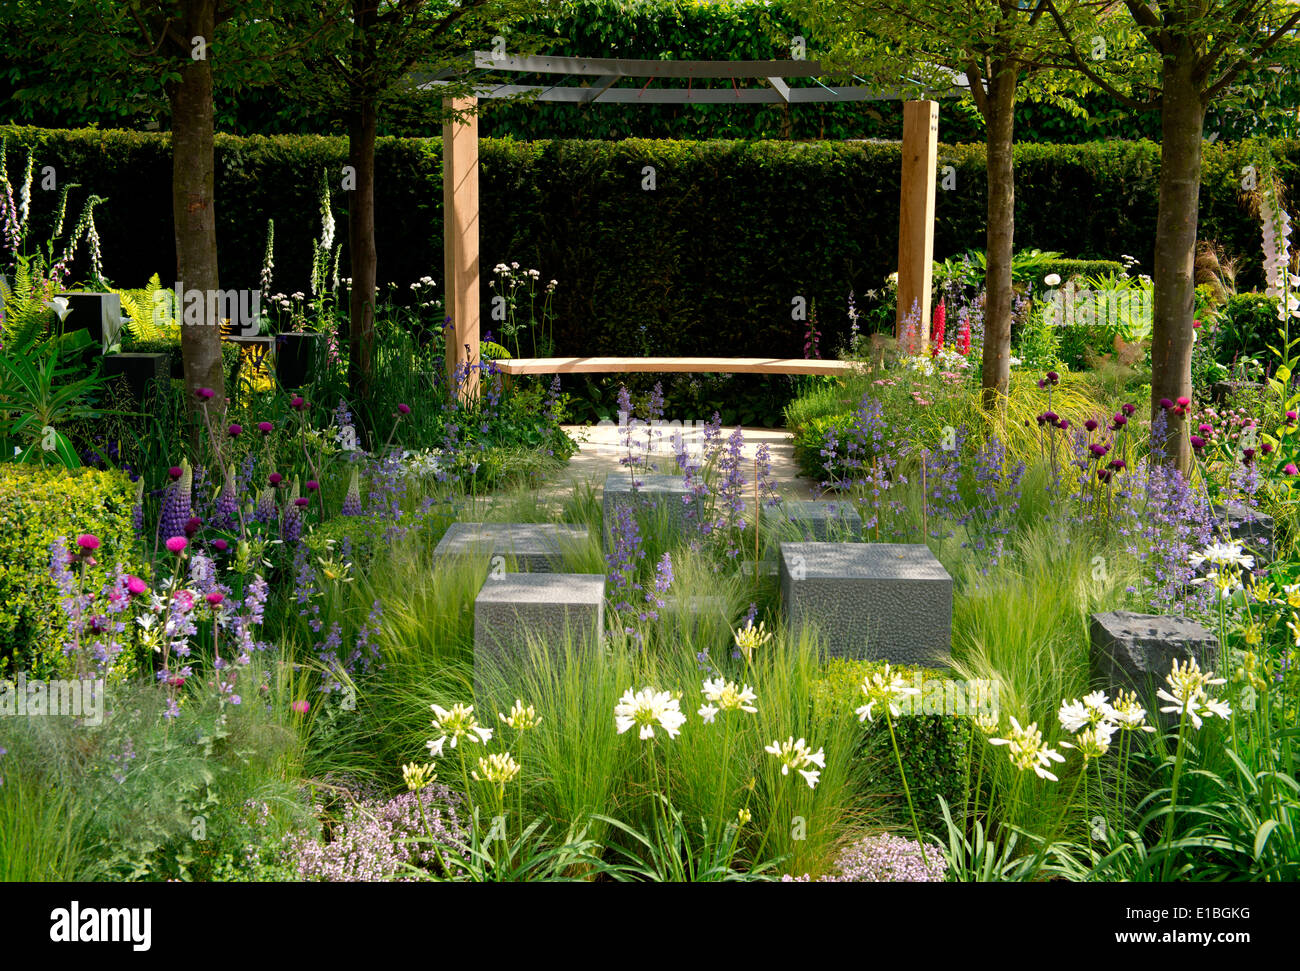 The Hope on the Horizon Help for Heroes Garden at The Chelsea Flower Show 2014, London, UK Stock Photo